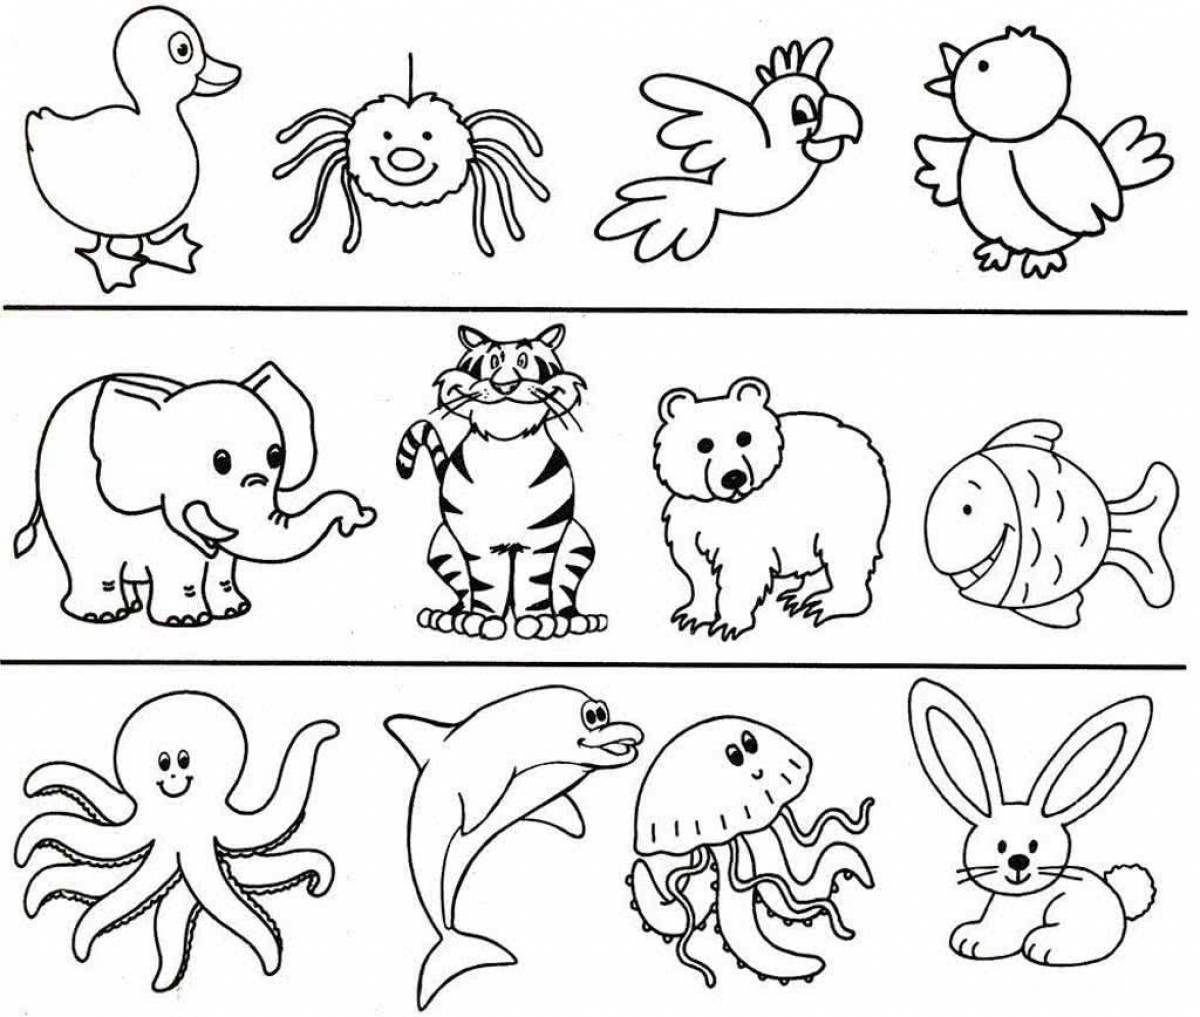 A bright coloring game for 3-4 year olds